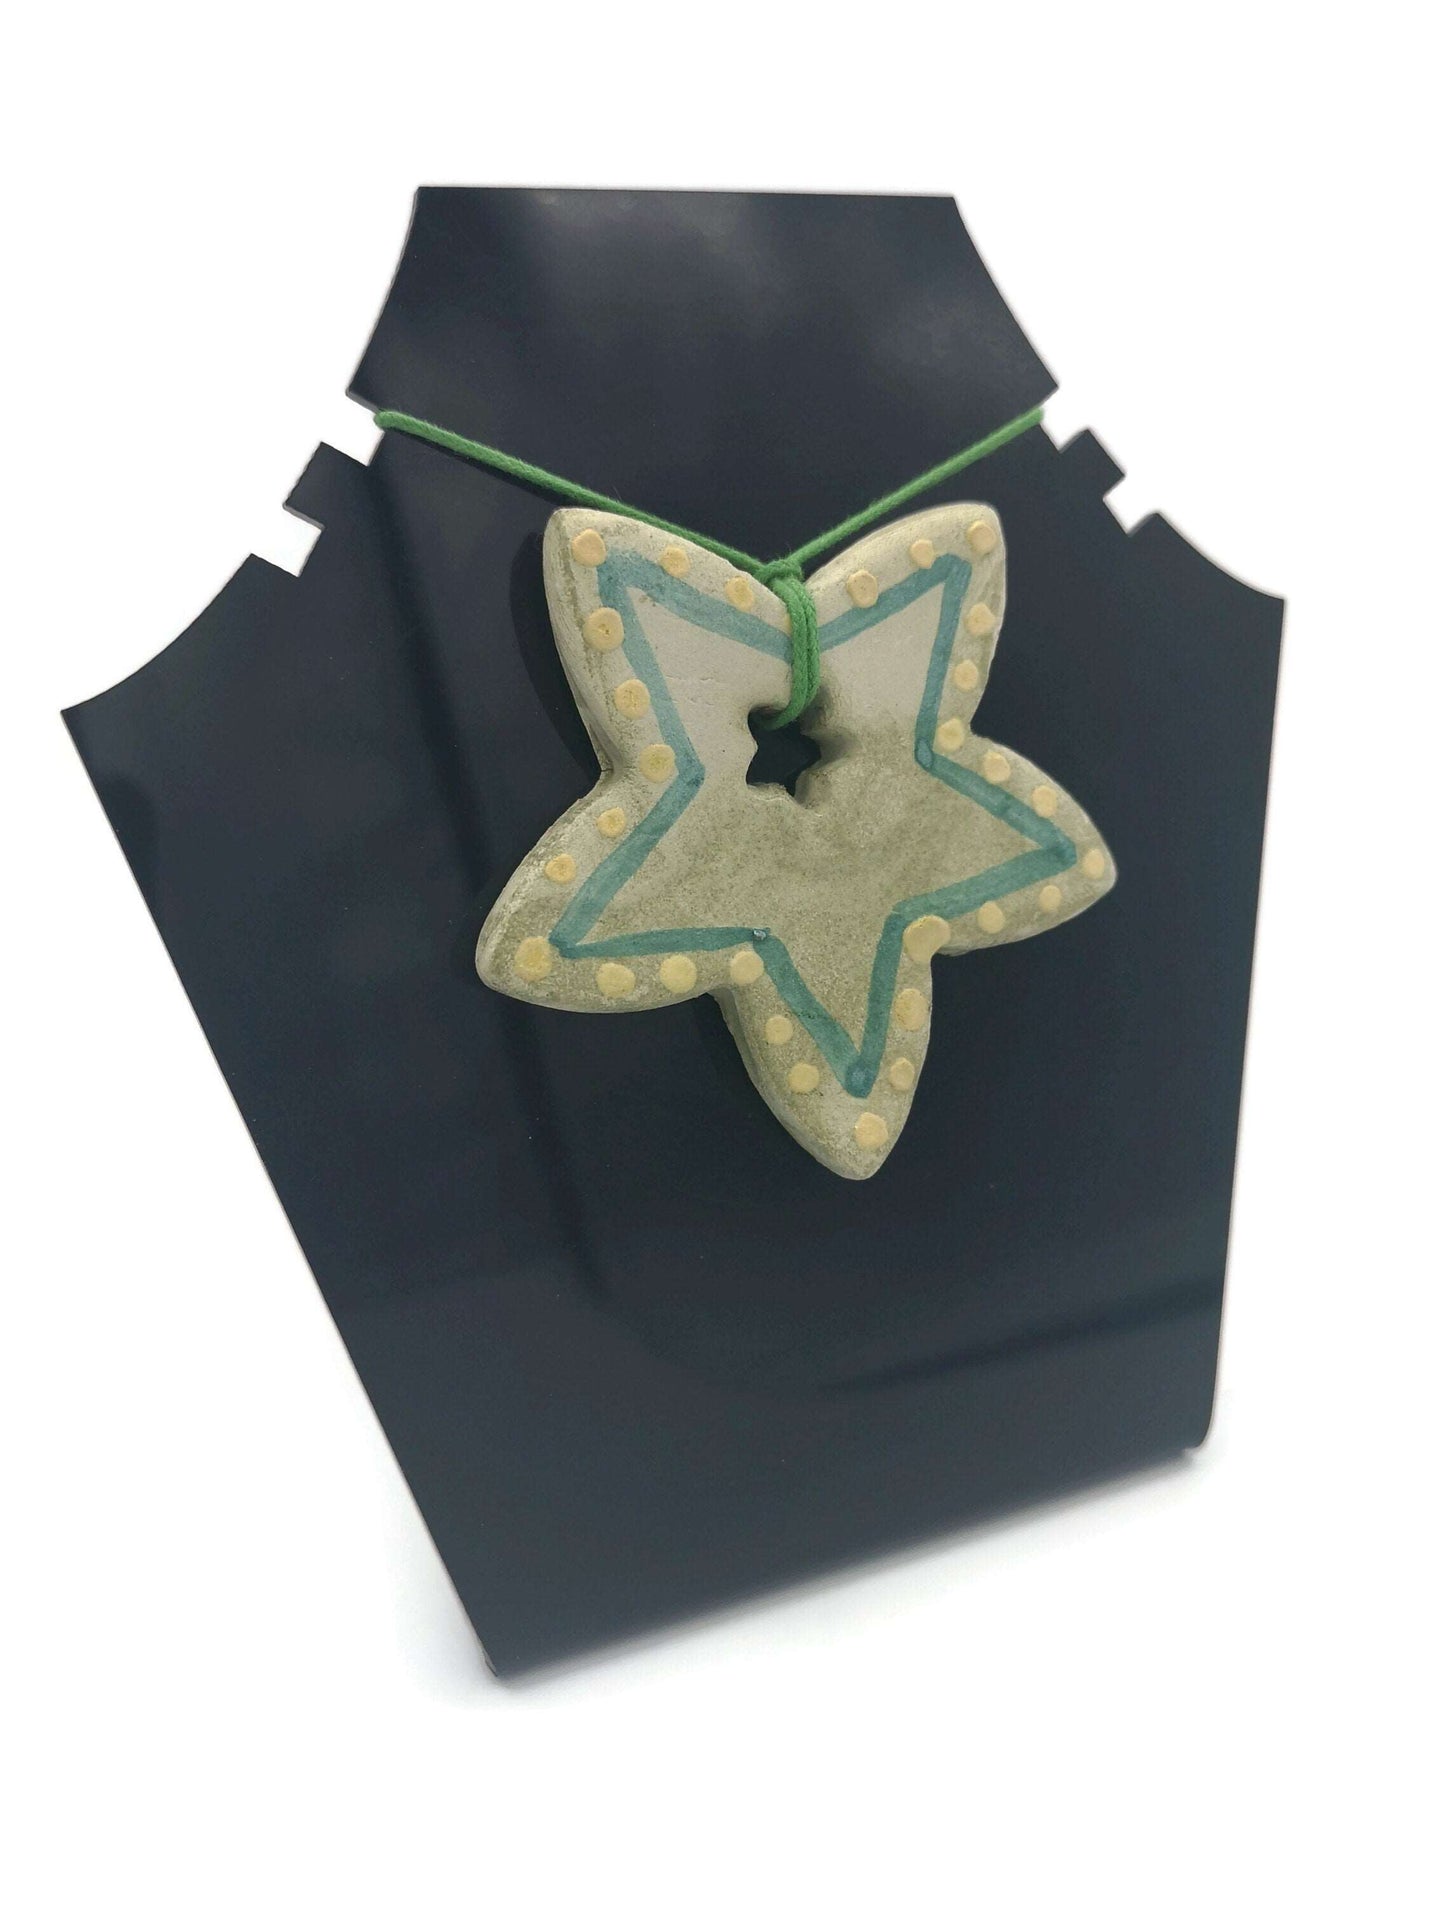 1Pc Extra Large 60mm Green Star Handmade Ceramic Necklace Pendant for Unique Jewelry Making, Hand Painted Clay Charms For Women Fashion